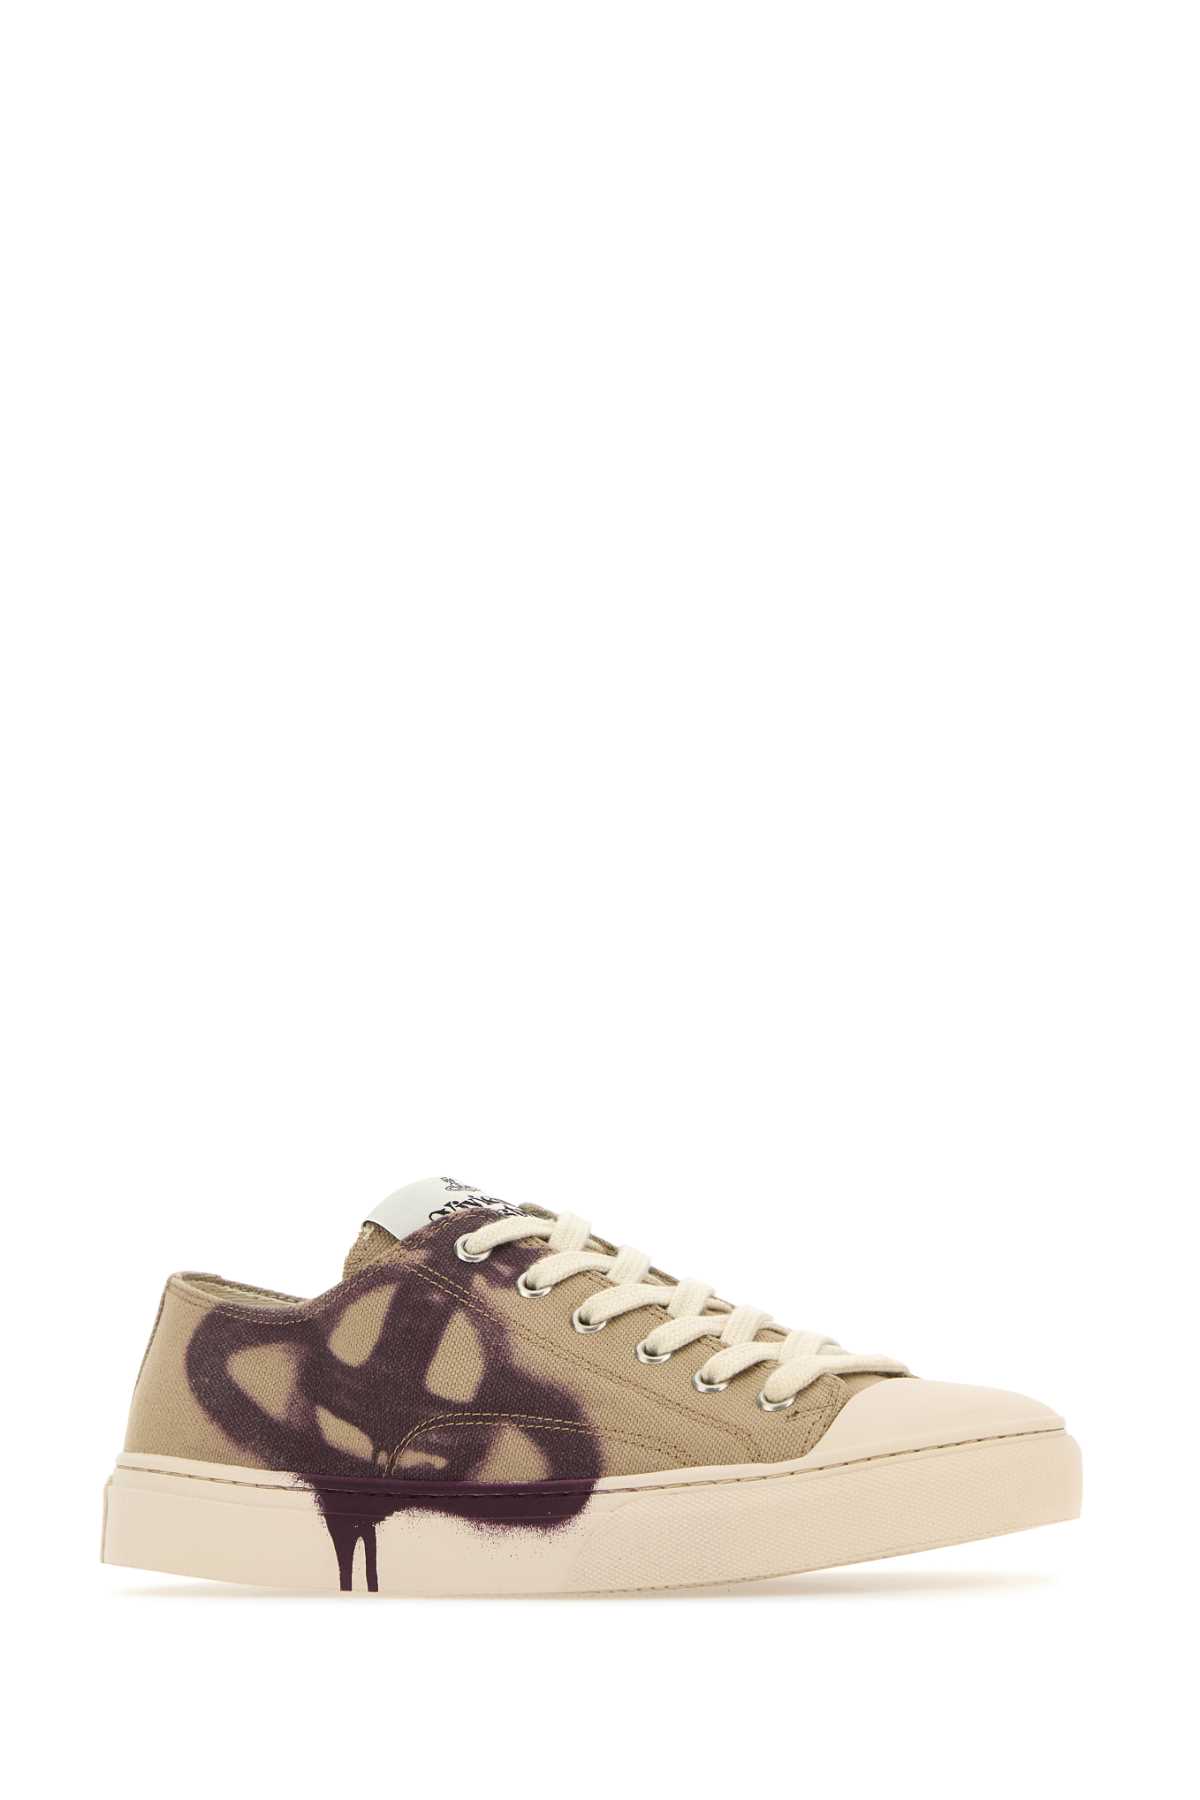 Vivienne Westwood Cappuccino Canvas Plimsoll Low Top 2.0 Trainers In C301